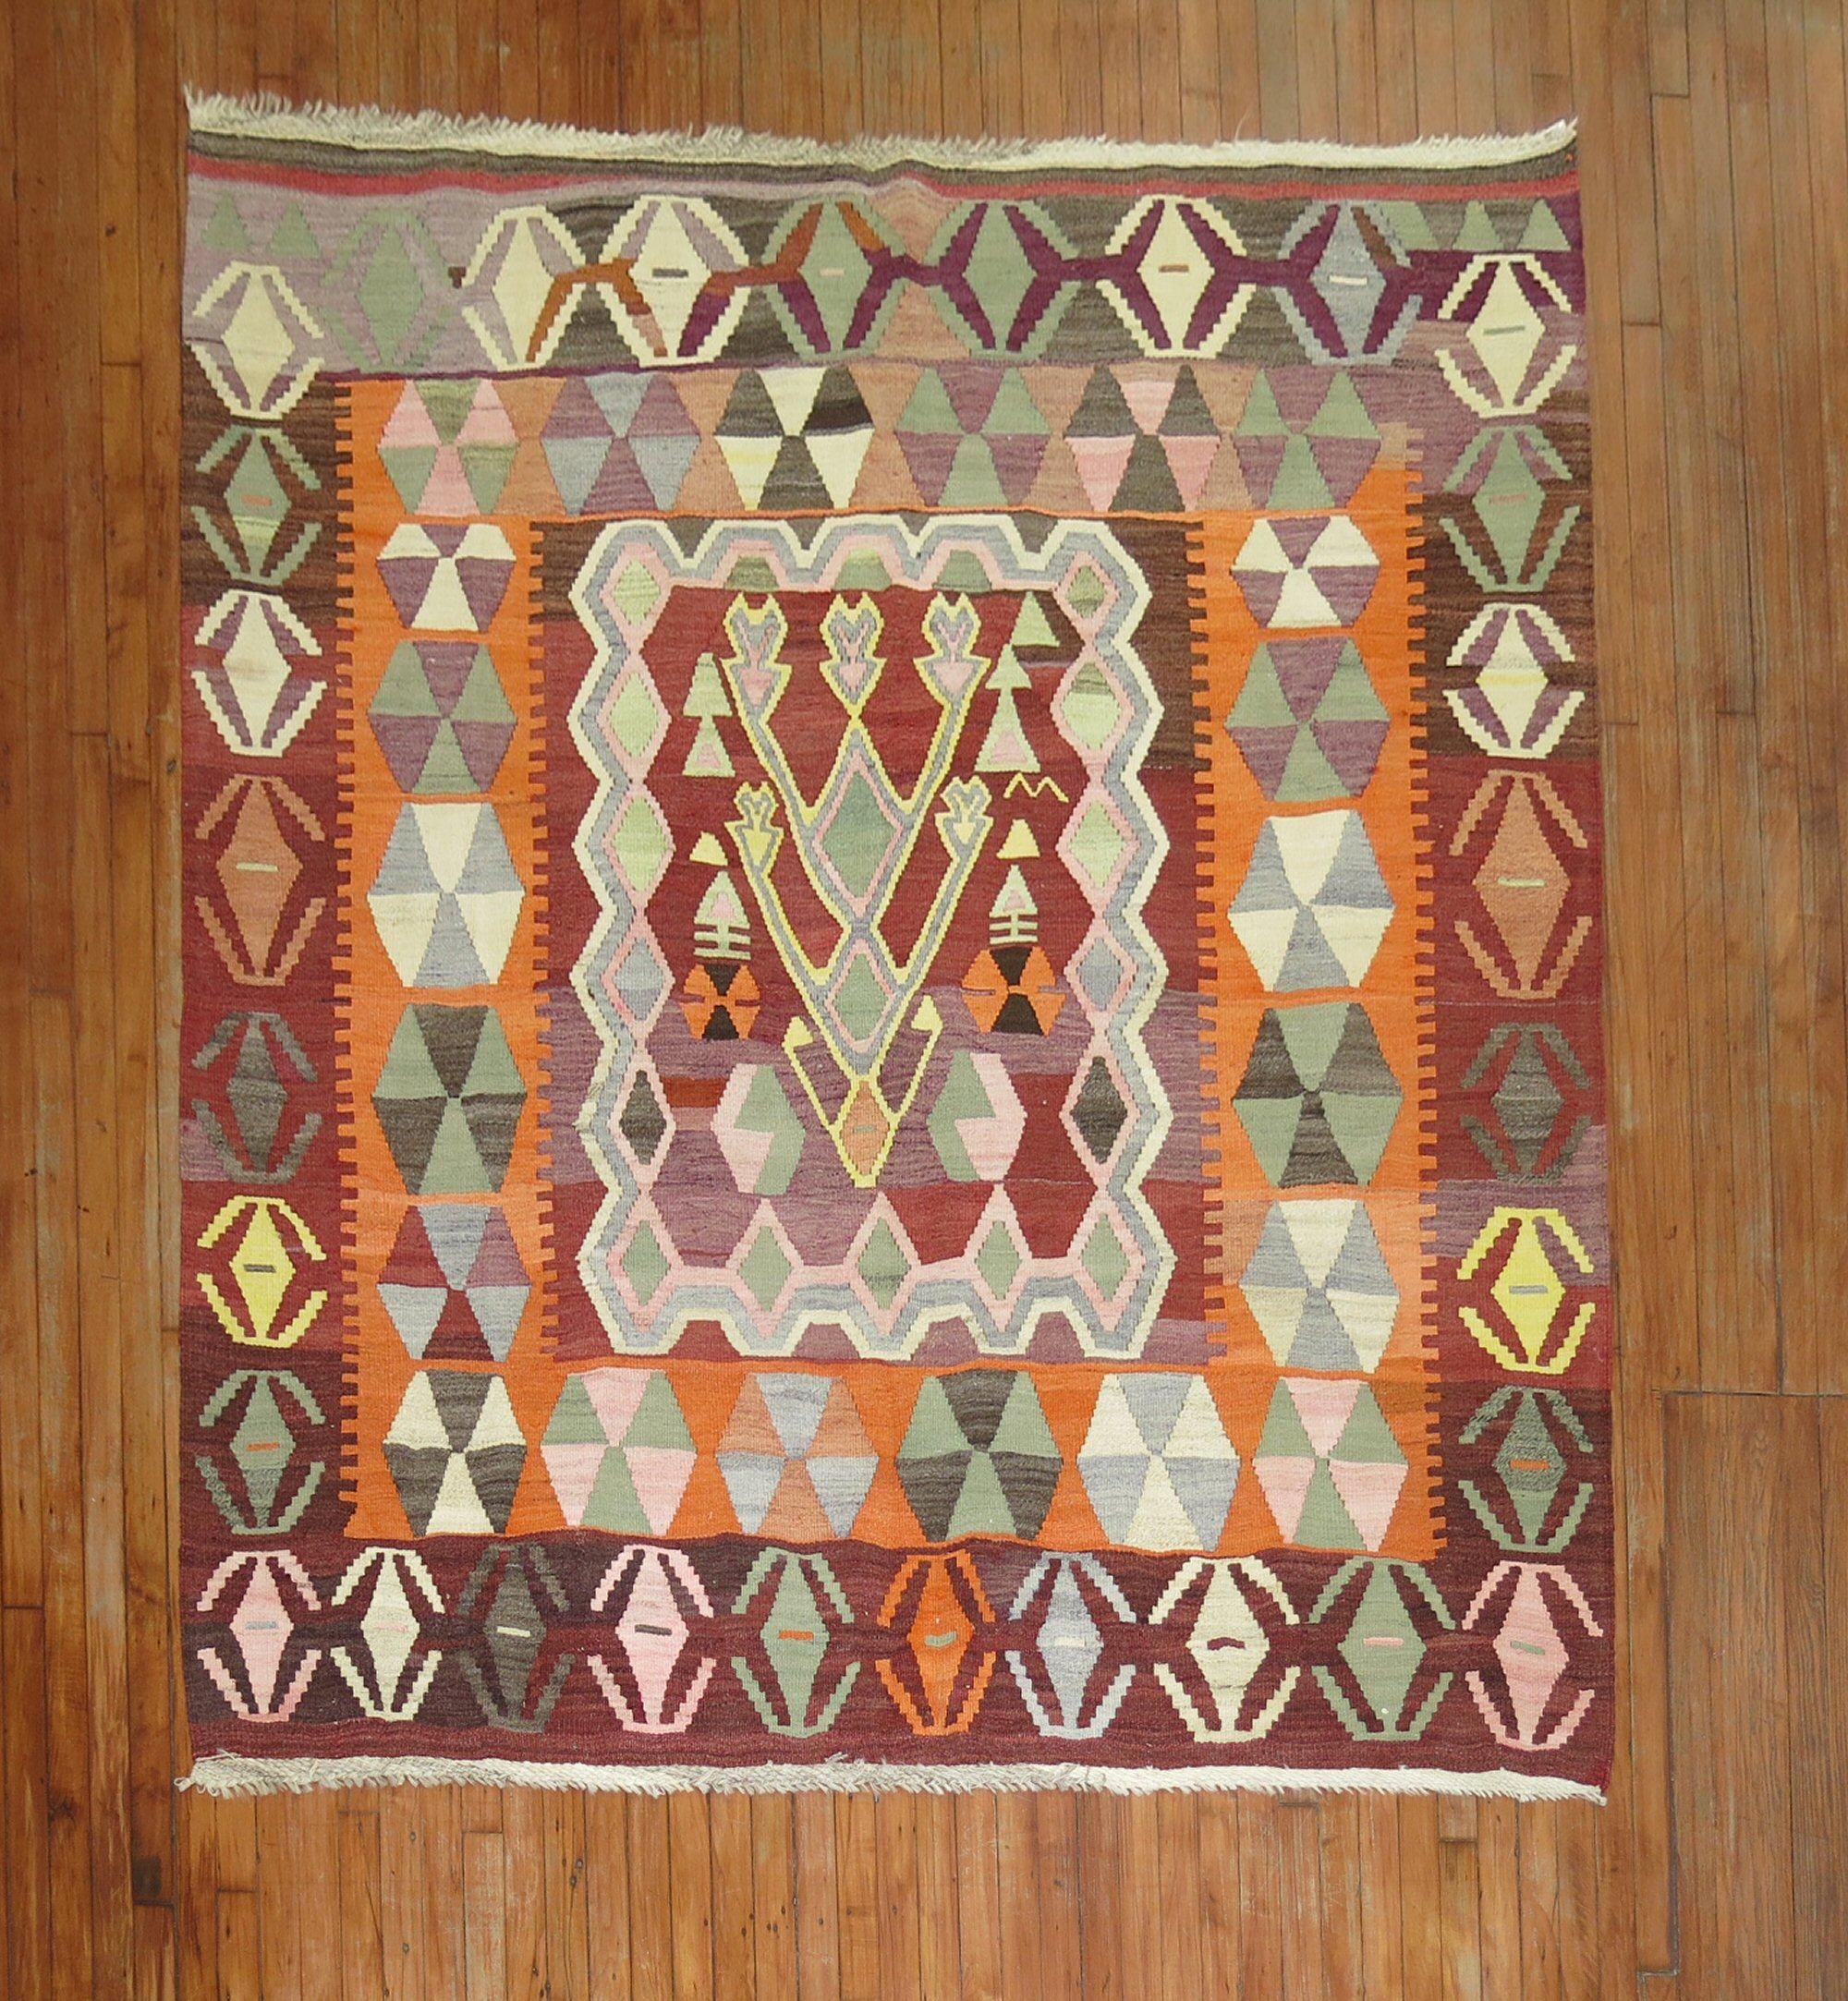 Mid-20th Century Turkish square size Kilim.

Measures: 6'8” x 7'

With the Jijim weaving technique, different colored threads are applied between the weft and warp threads, on the reverse of the weave. It is often used to decorate a plain-weave